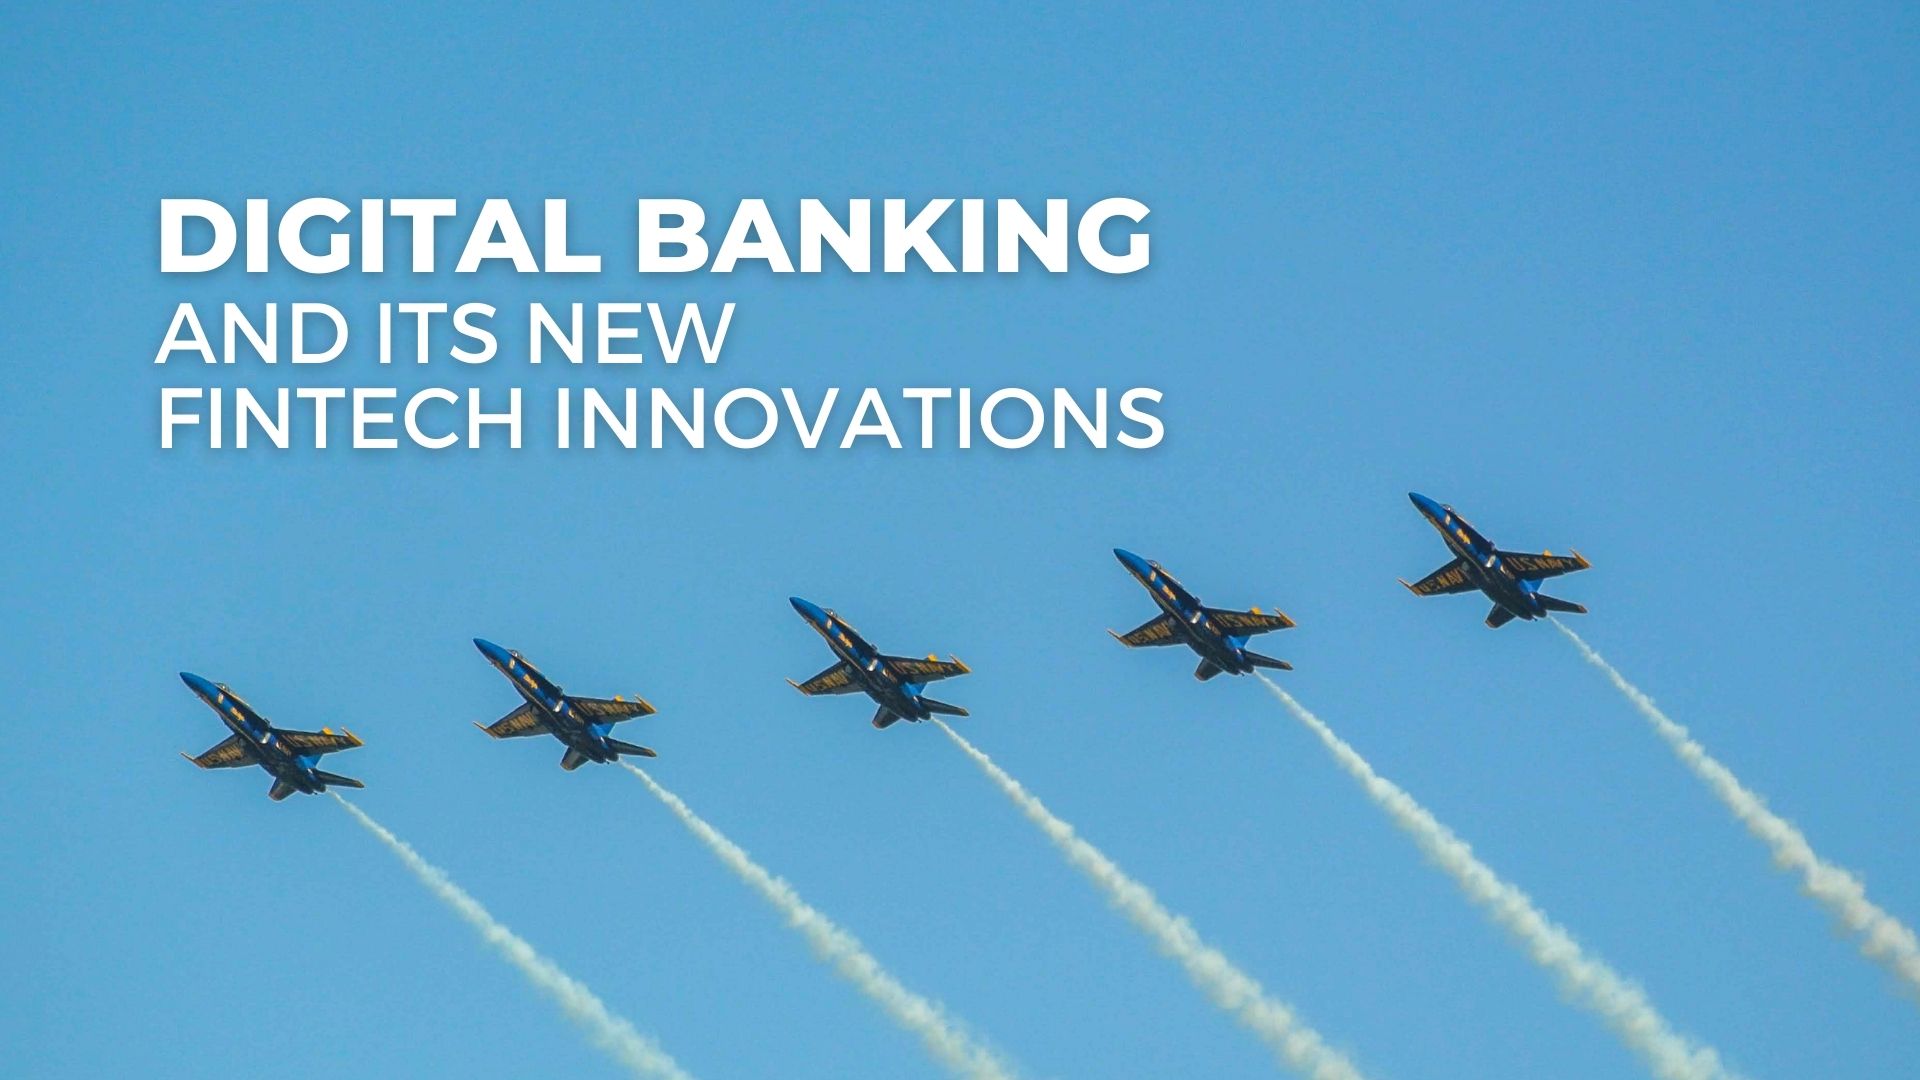 Digital banking and its new fintech innovations